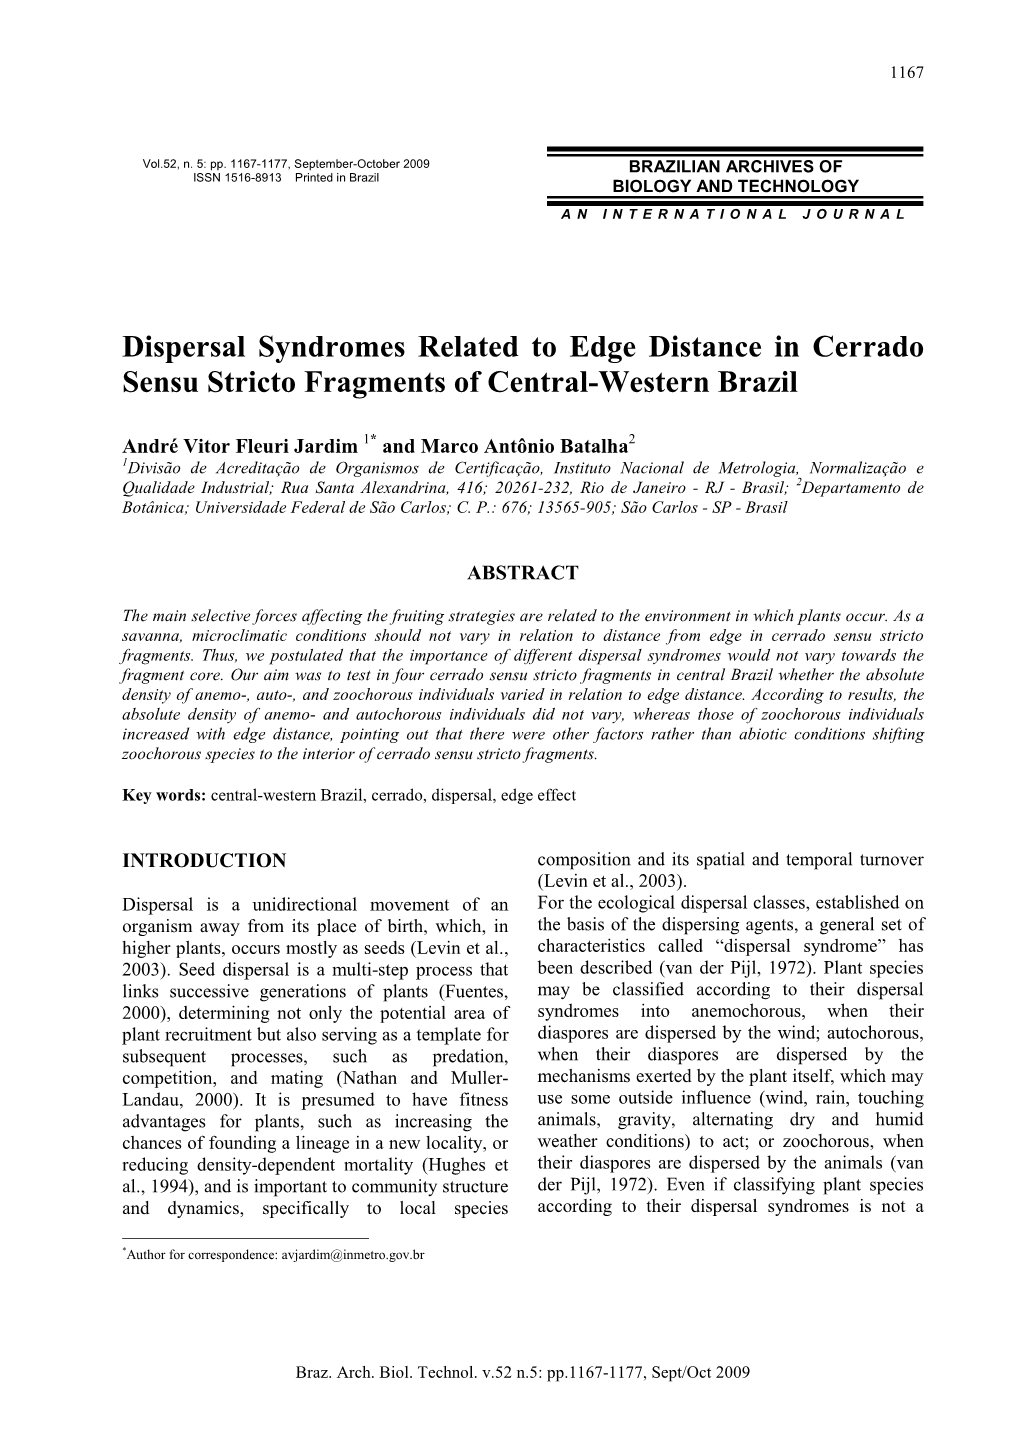 Dispersal Syndromes Related to Edge Distance in Cerrado Sensu Stricto Fragments of Central-Western Brazil